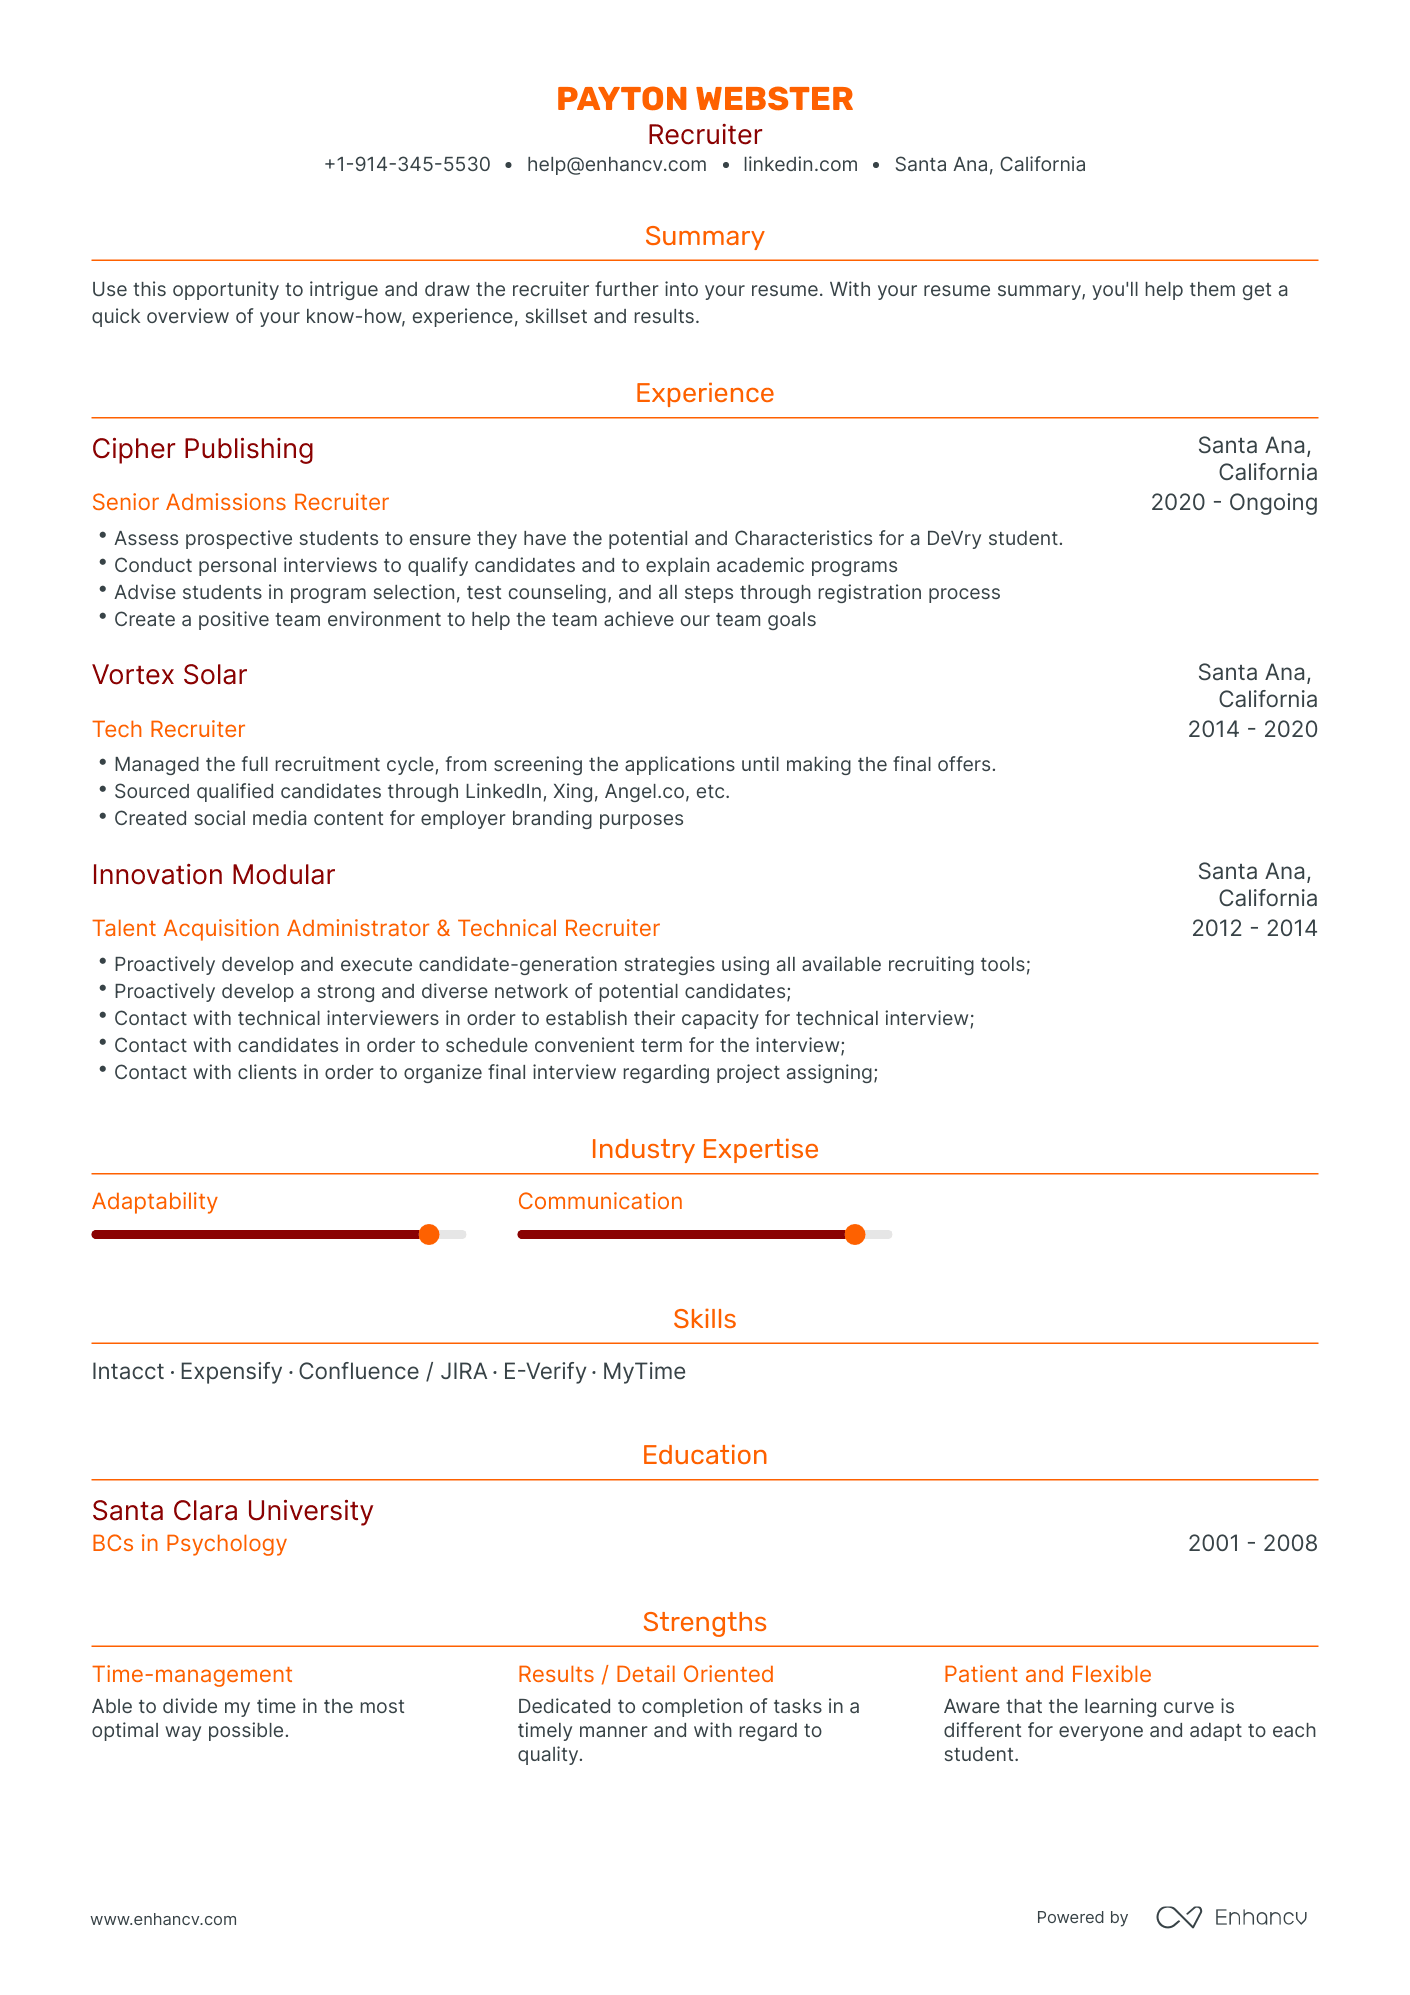 Traditional Recruiter Resume Template